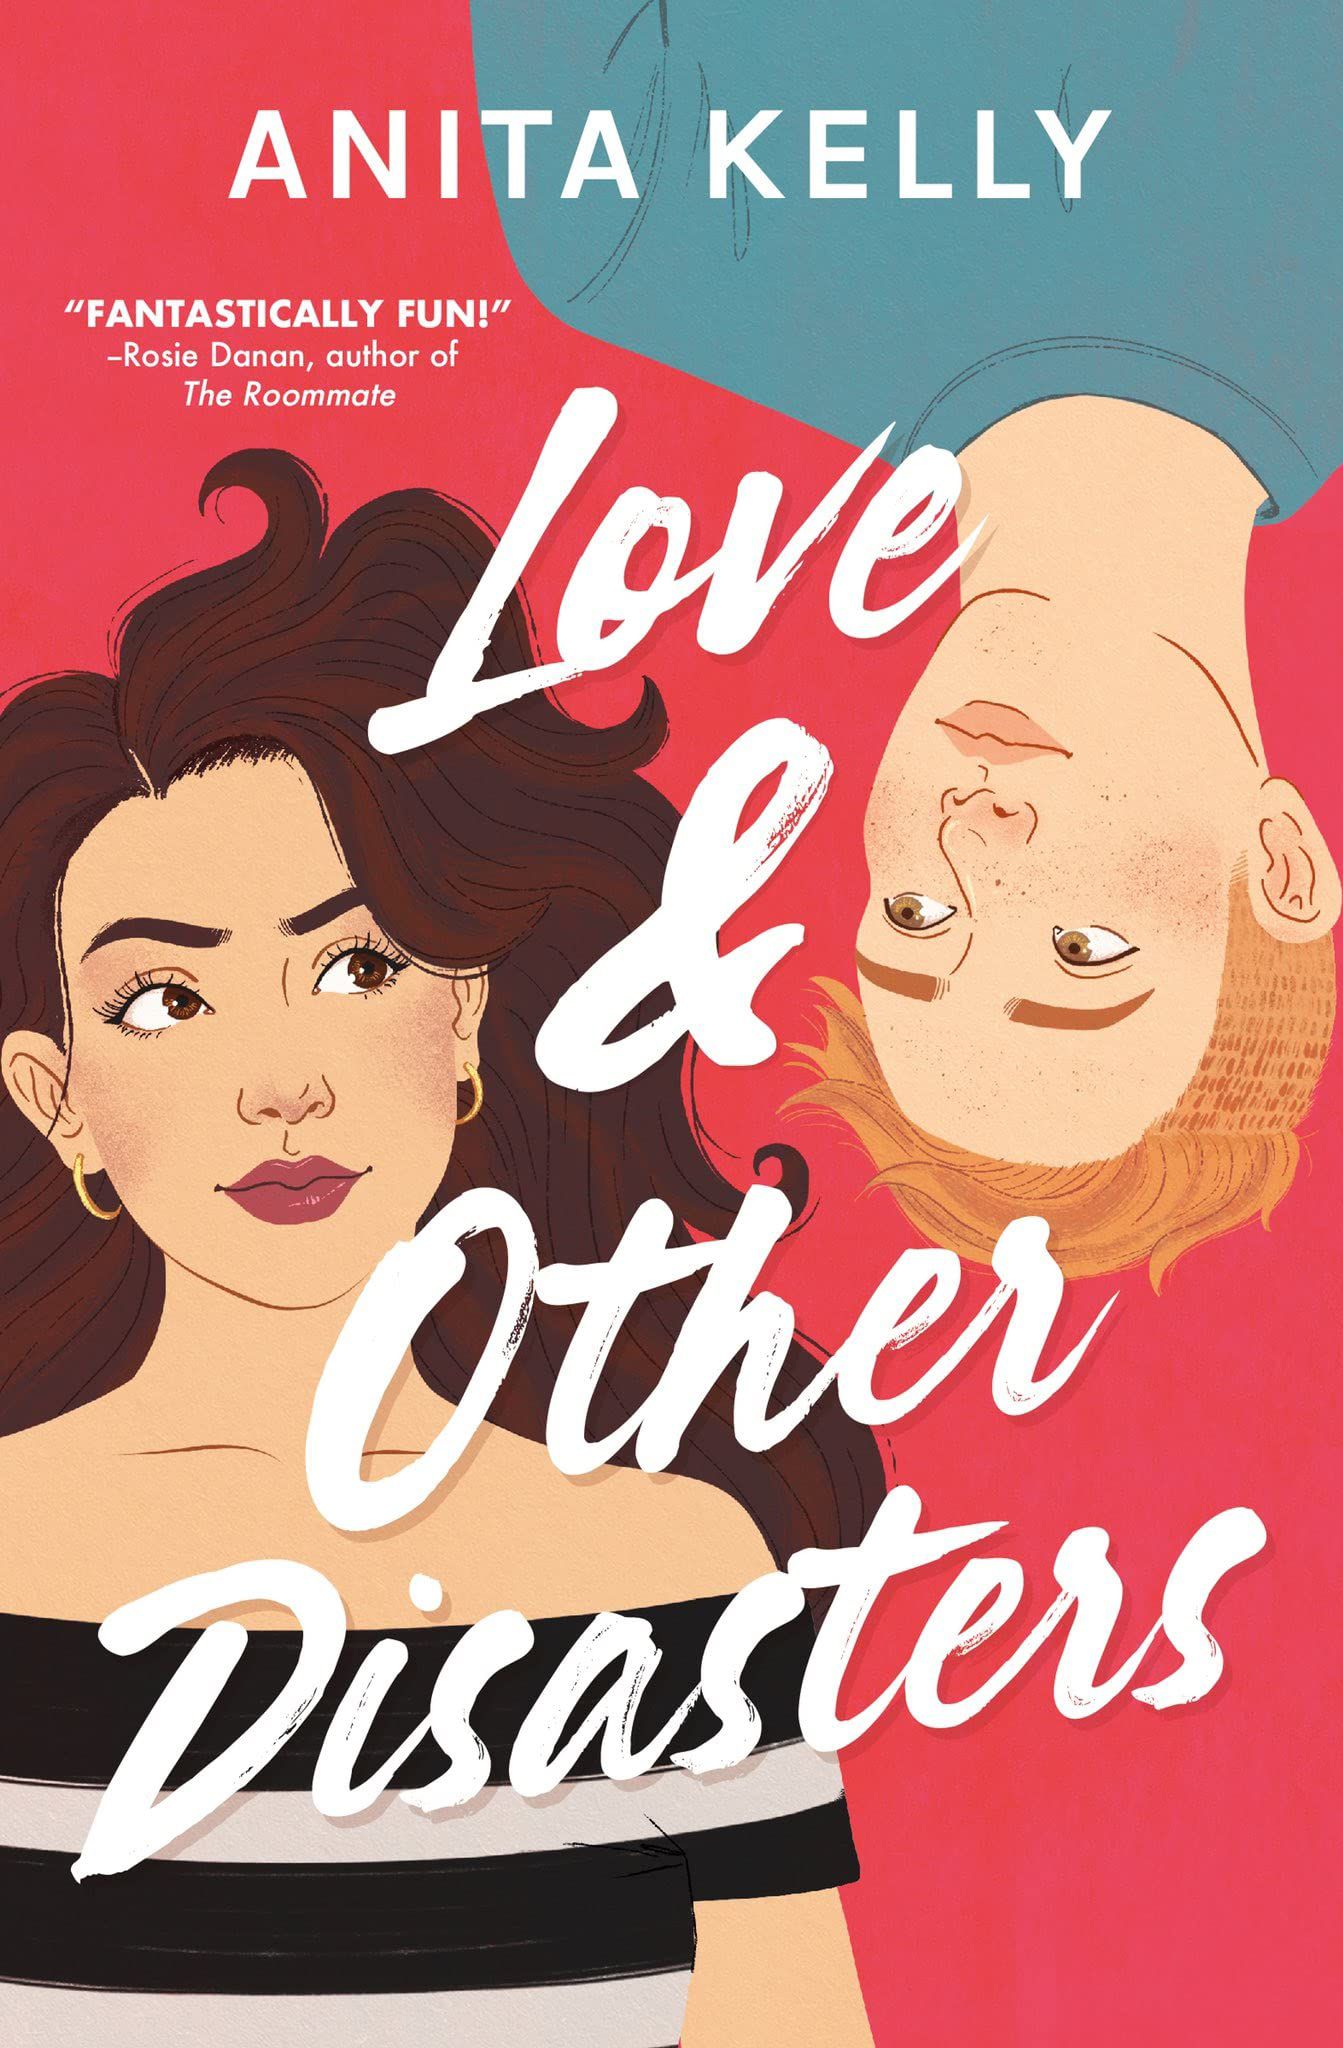 "Love & Other Disasters by Anita Kelly; 'Fantastically fun! –Rosie Danan, author of The Roommate'" — Image shows cartoon of two young people looking at each other